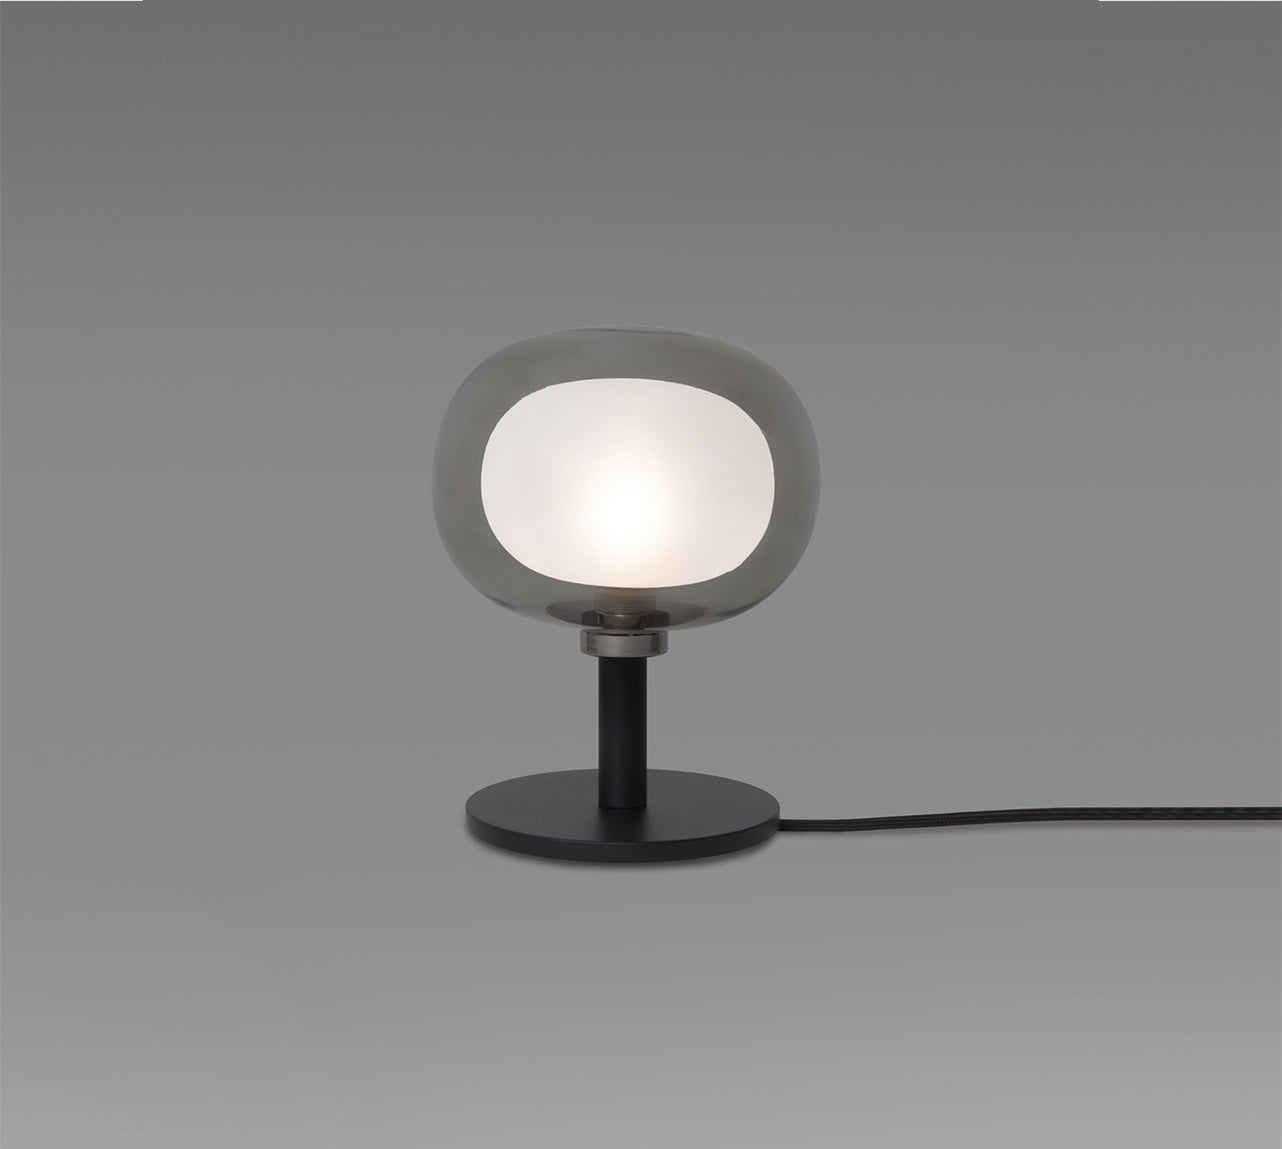 NABILA TABLE LAMP BY TOOY from $550.00